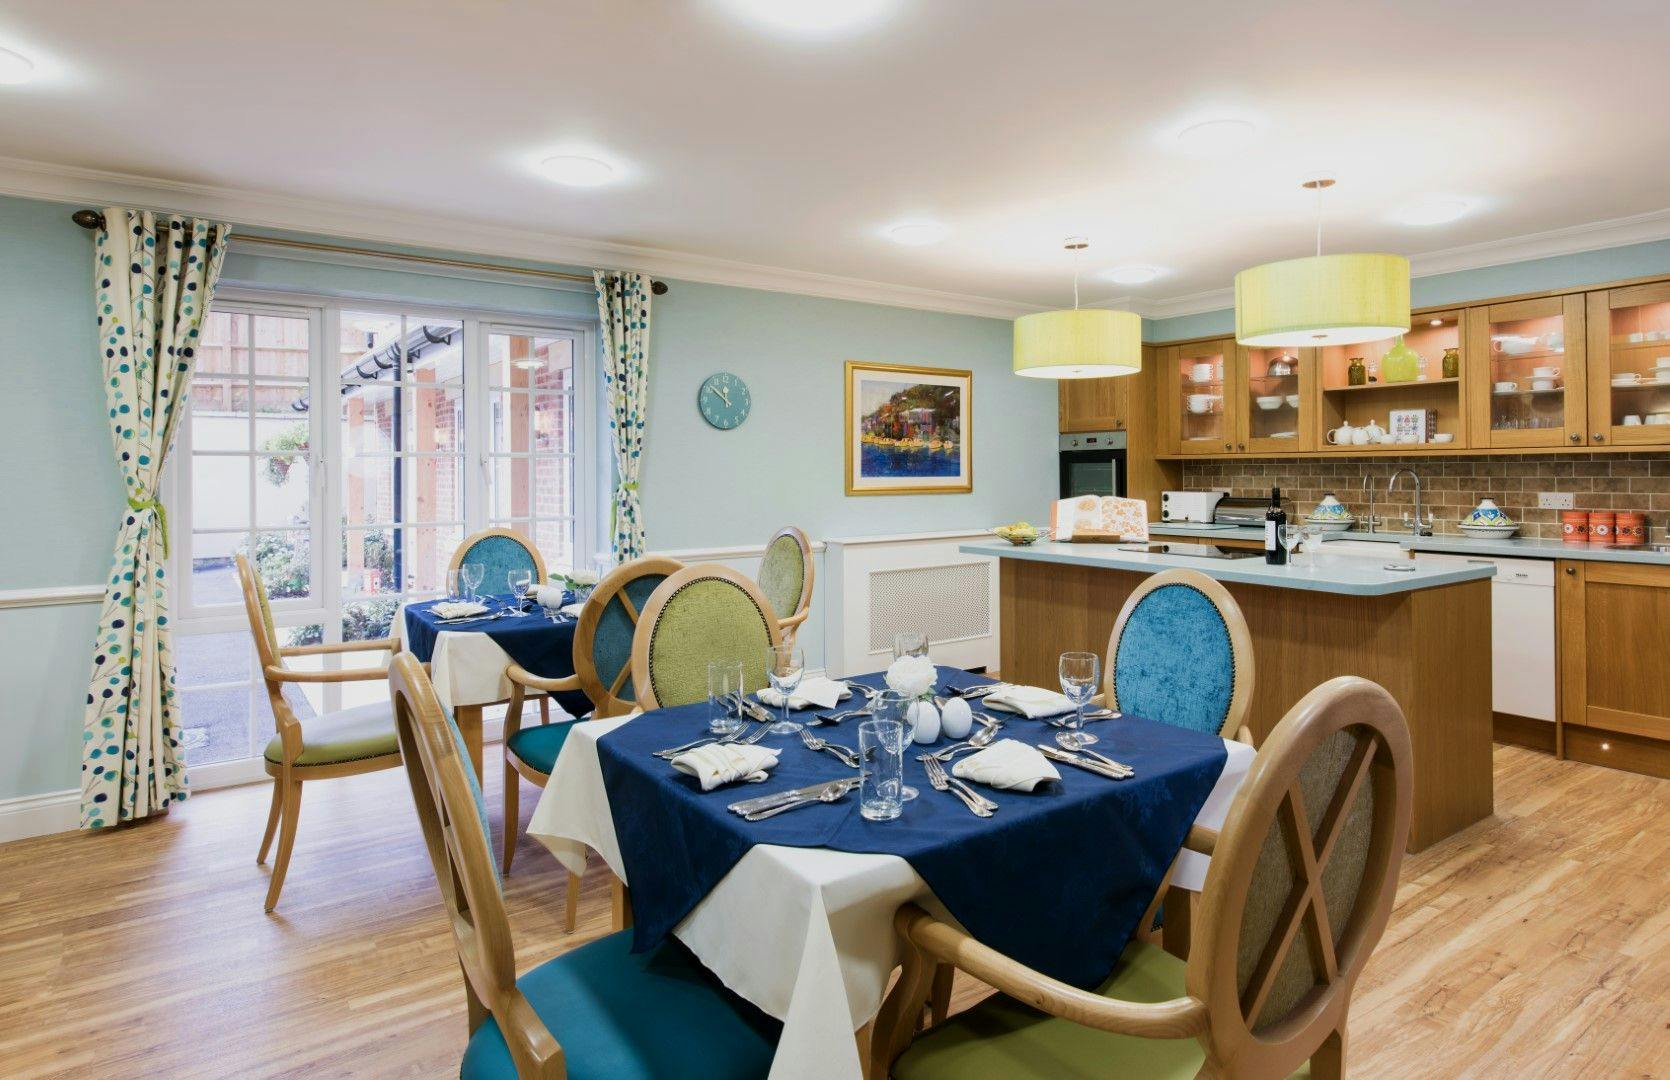 Dining Area at Lakeview Care Home in Surrey, South East England